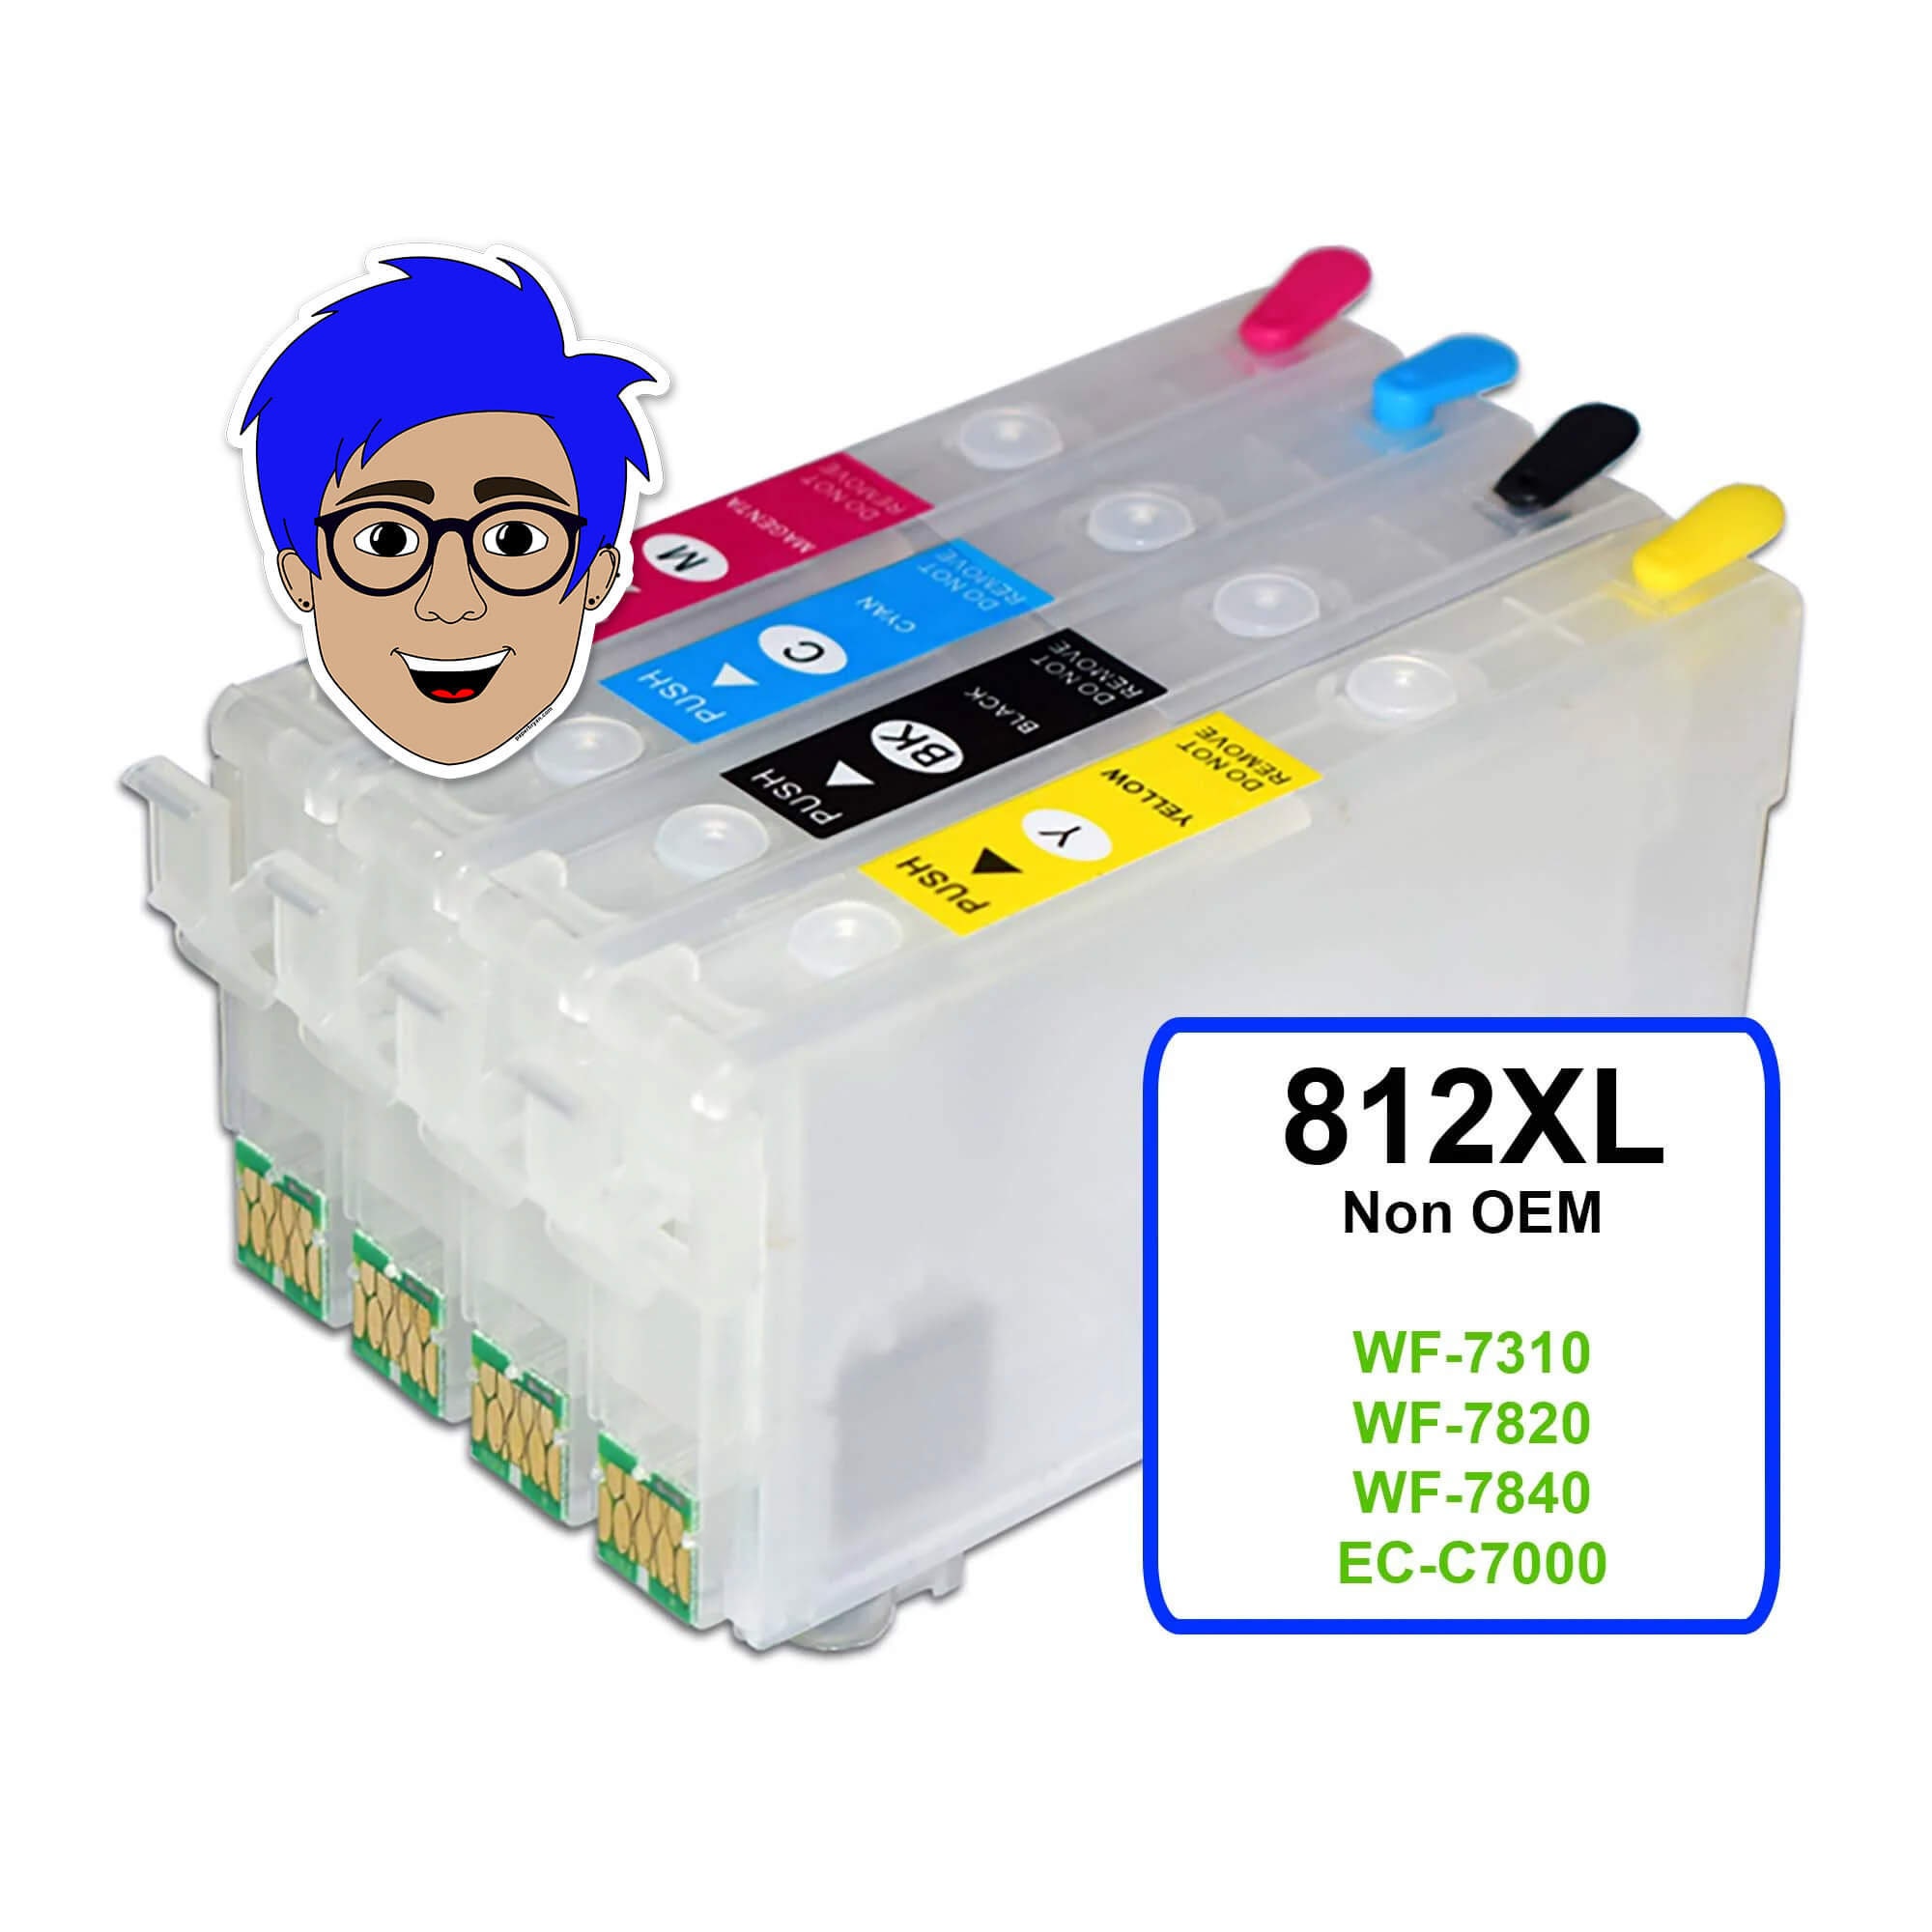 5x100ml Sublimation Ink for Epson Wf-3720 Wf-3730 Wf-3733 Printer T702 702  Refillable Ink Cartridges CISS for Heat Press 